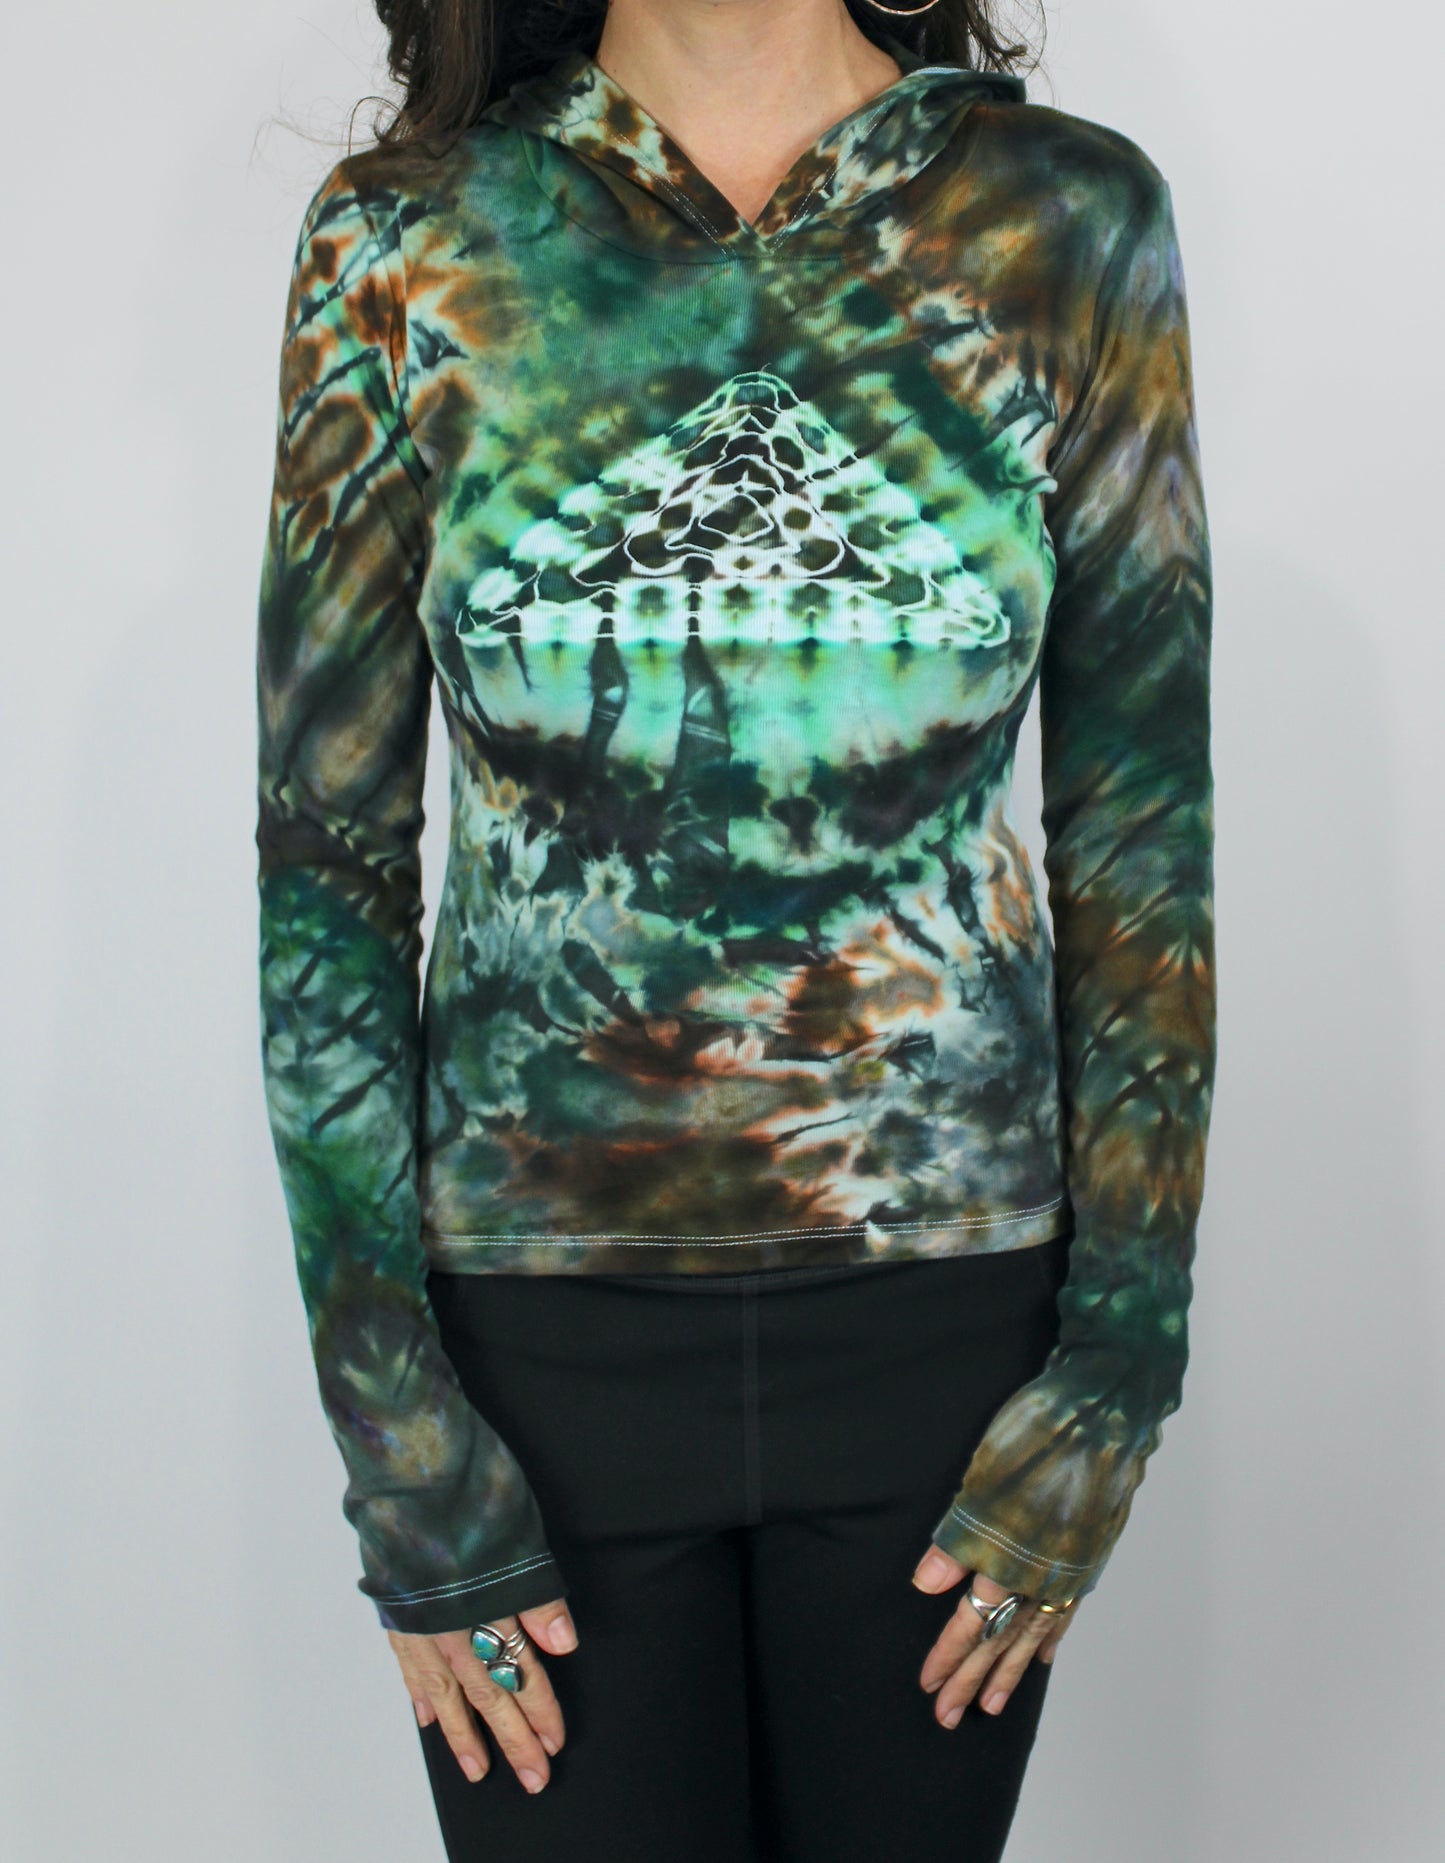 S - "Emerald Potion" Hooded Long Sleeve